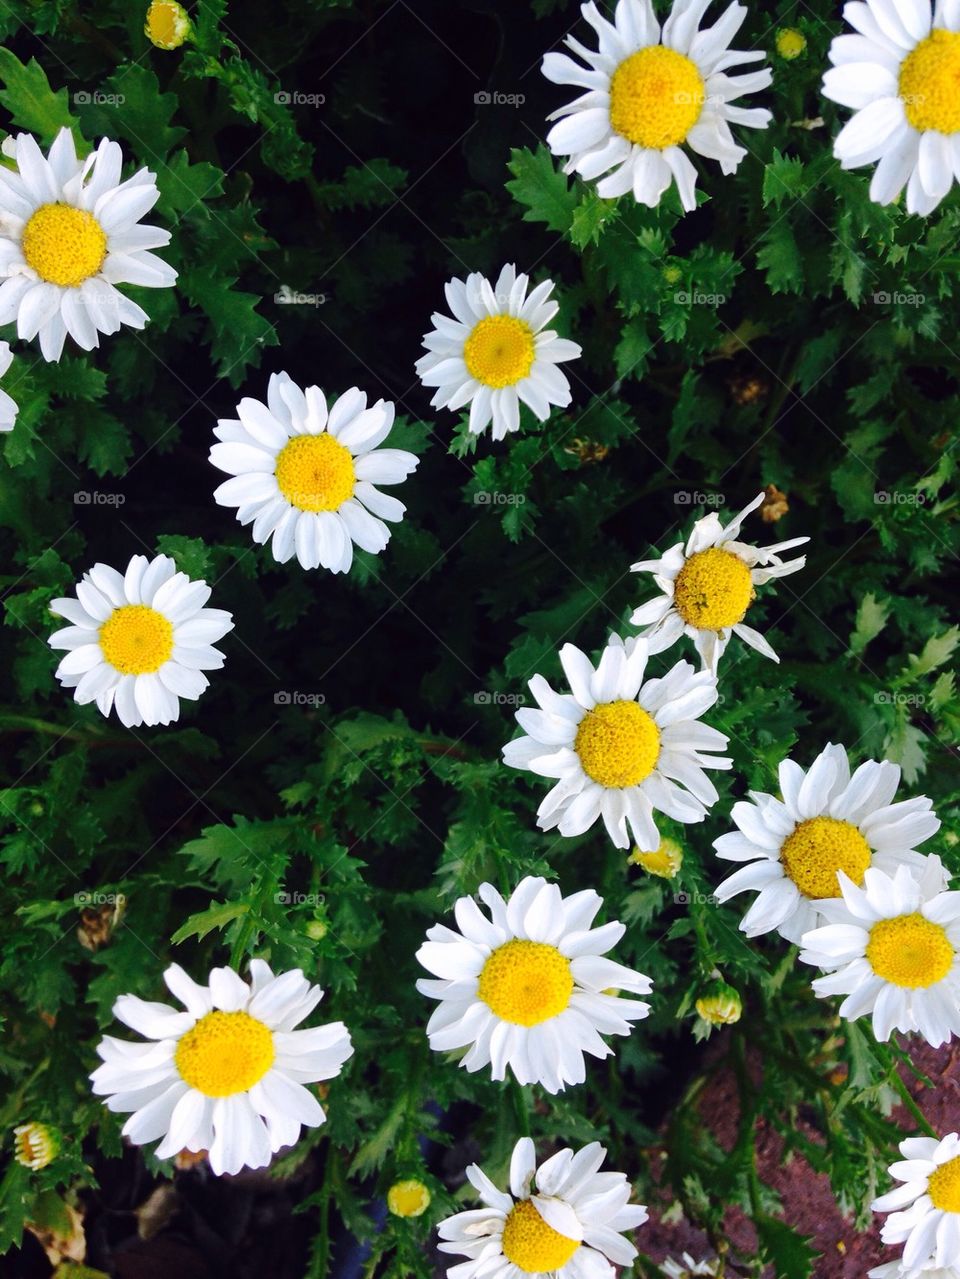 High angle view of a daisies